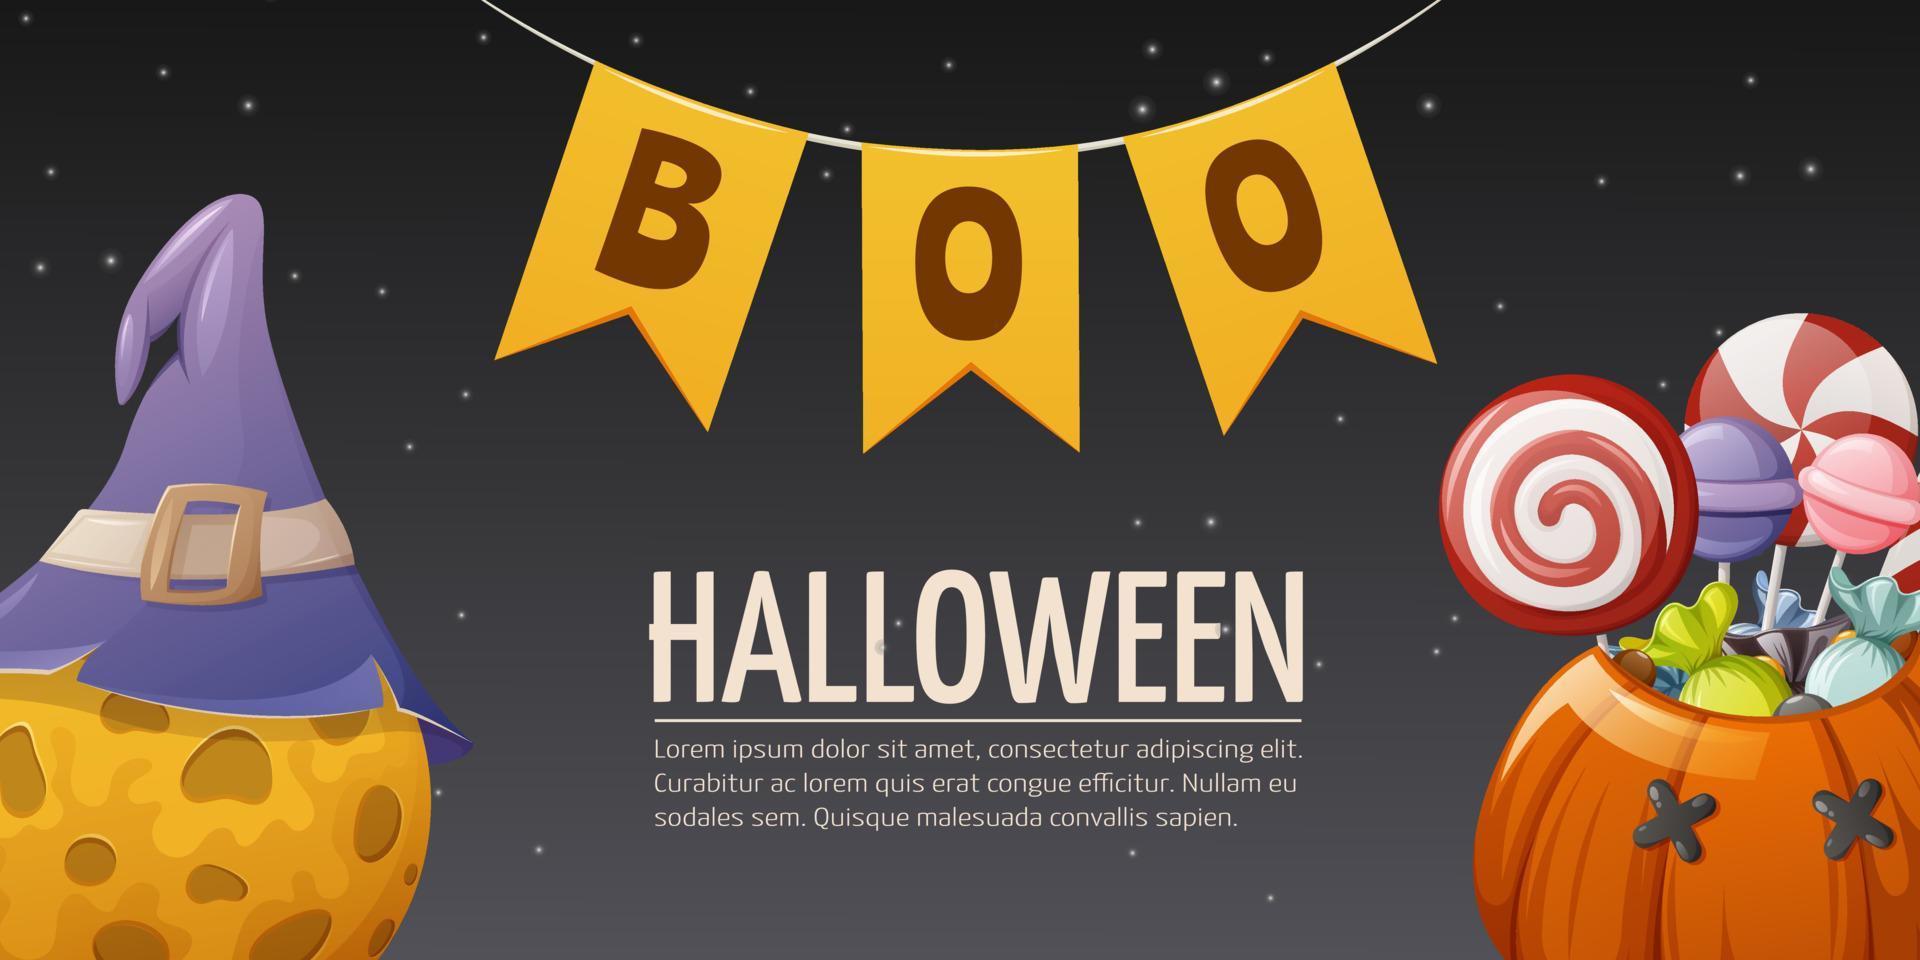 Halloween night sky background. Moon in the sorcery hat and pumpkin with sweet treats. Garland from flags with text boo. Cartoon vector illustration.